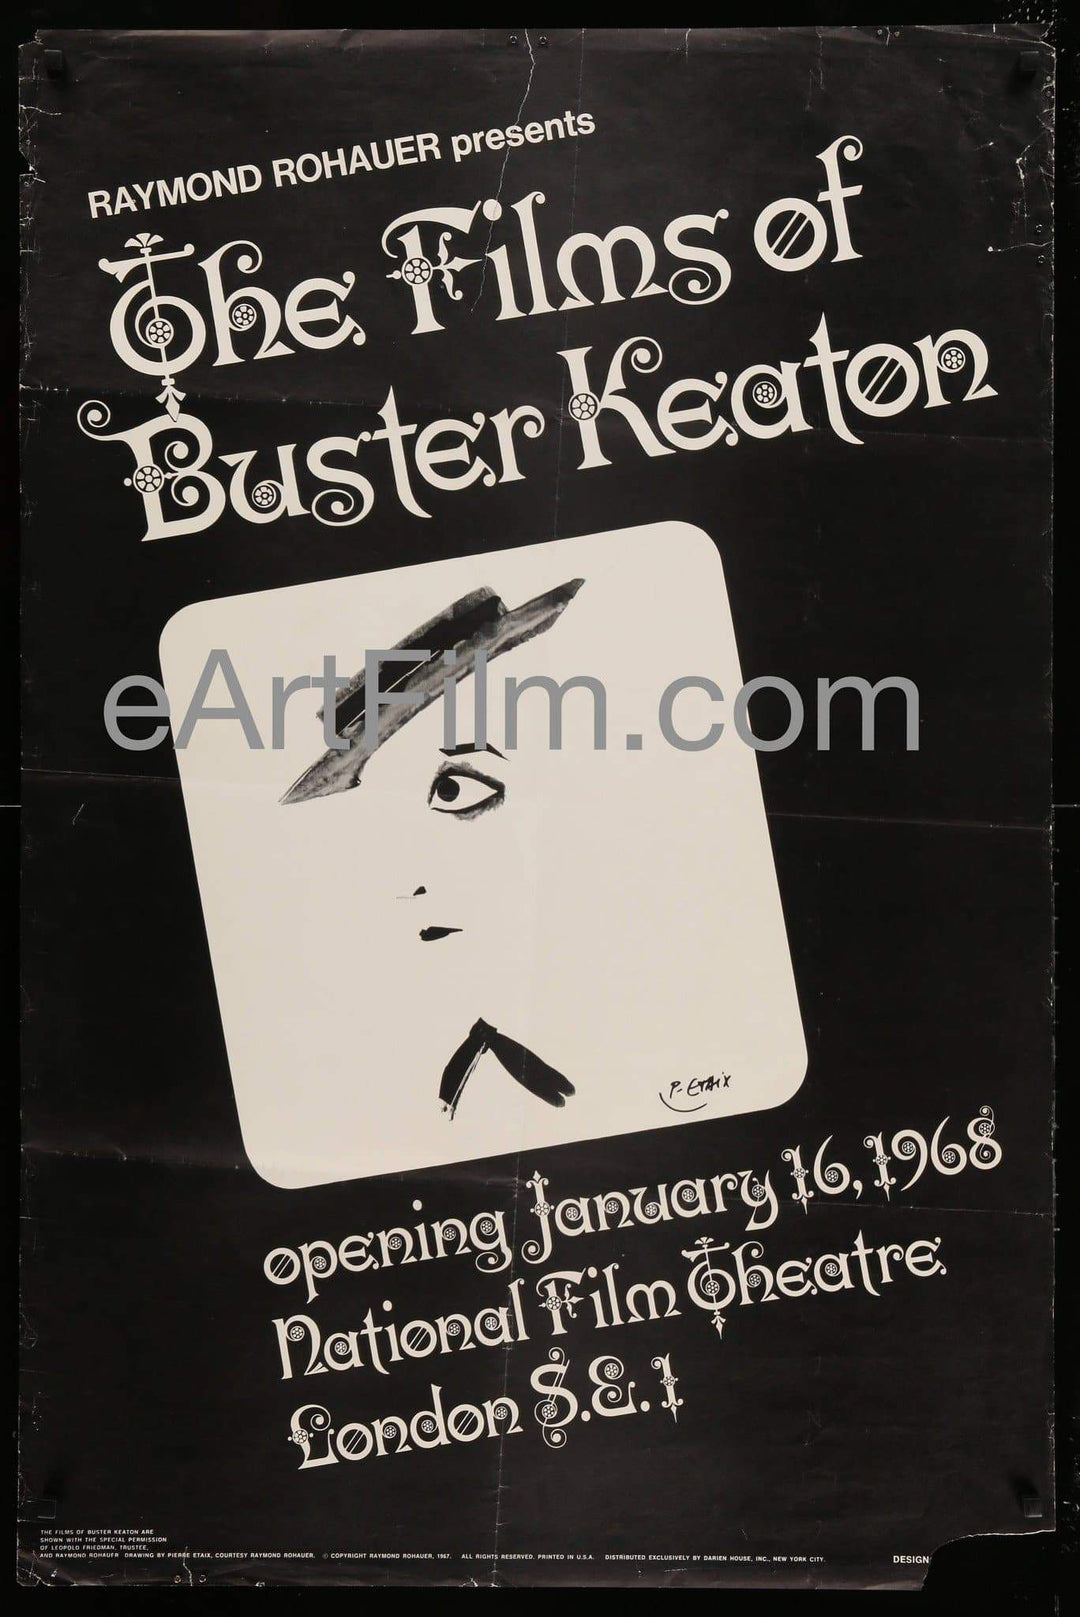 eArtFilm.com British Film Festival Poster (30"x45") Films of Buster Keaton 1968 30x45 Raymond Rohauer-Cohen Film Collection-London